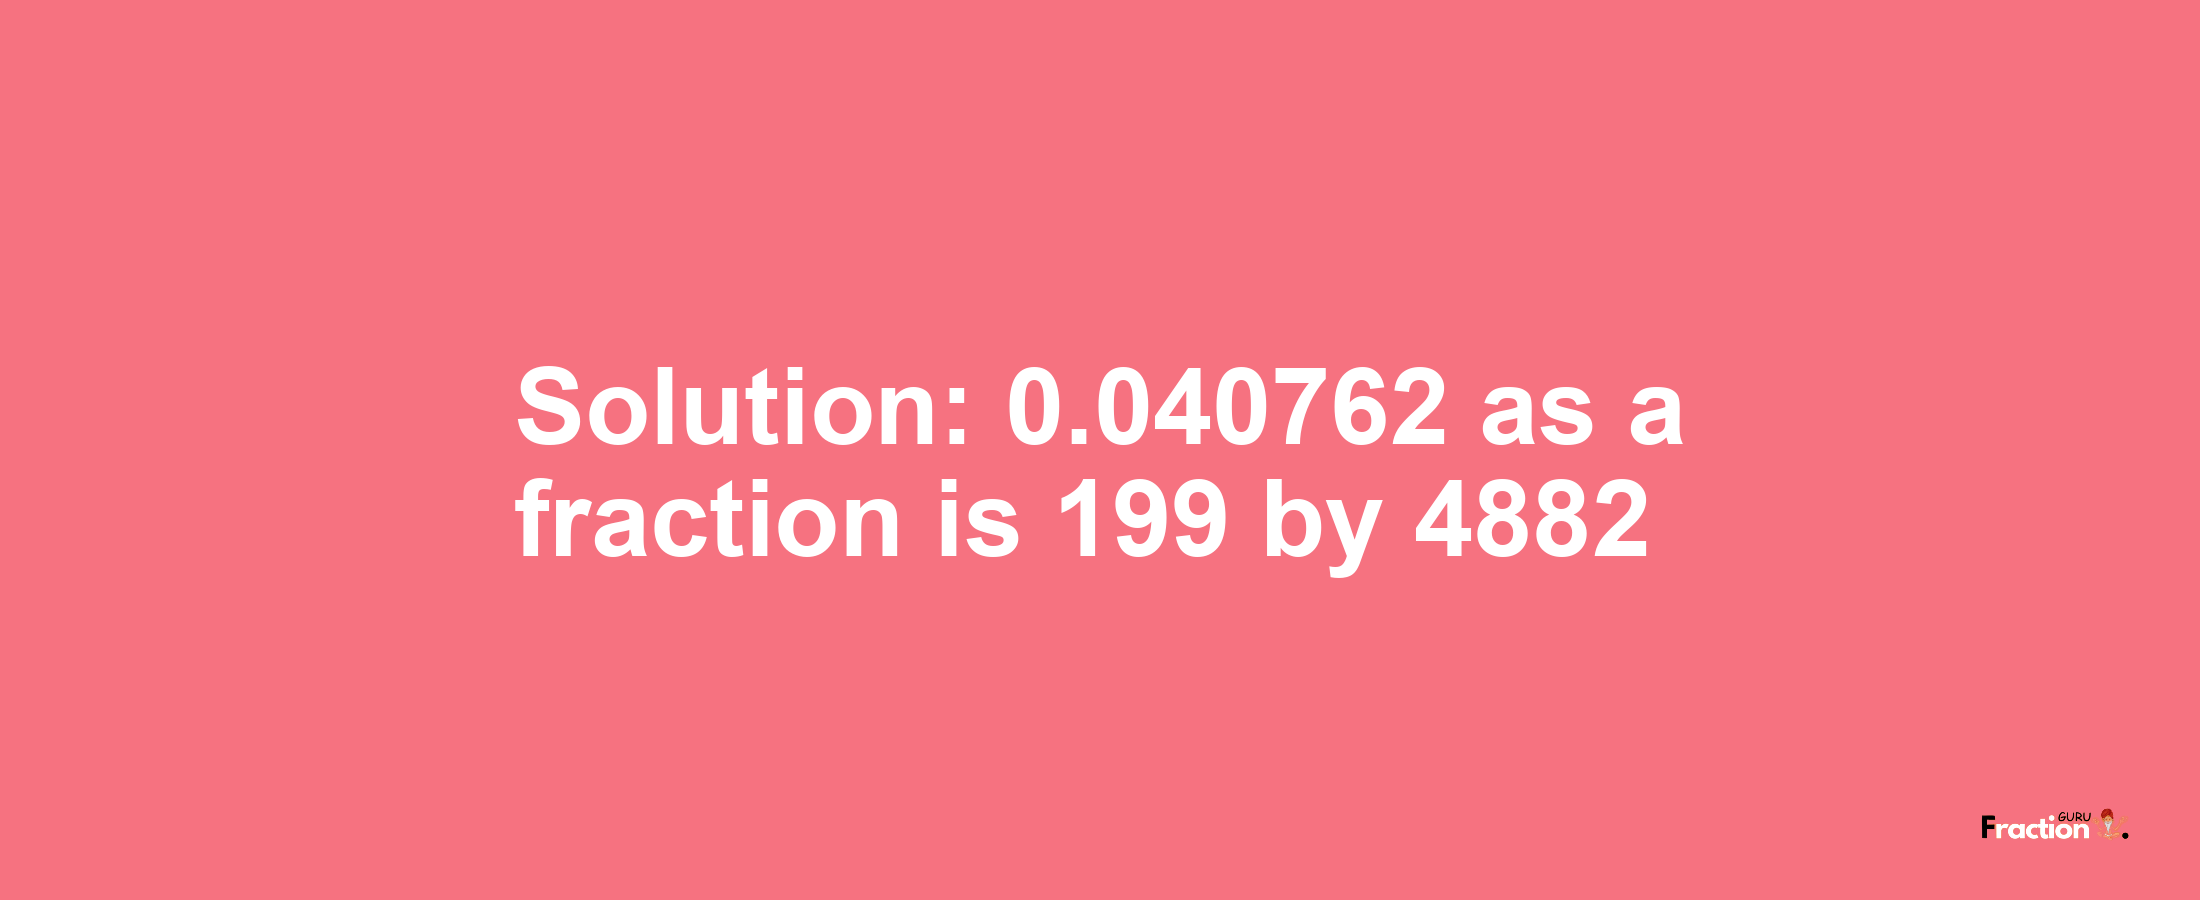 Solution:0.040762 as a fraction is 199/4882